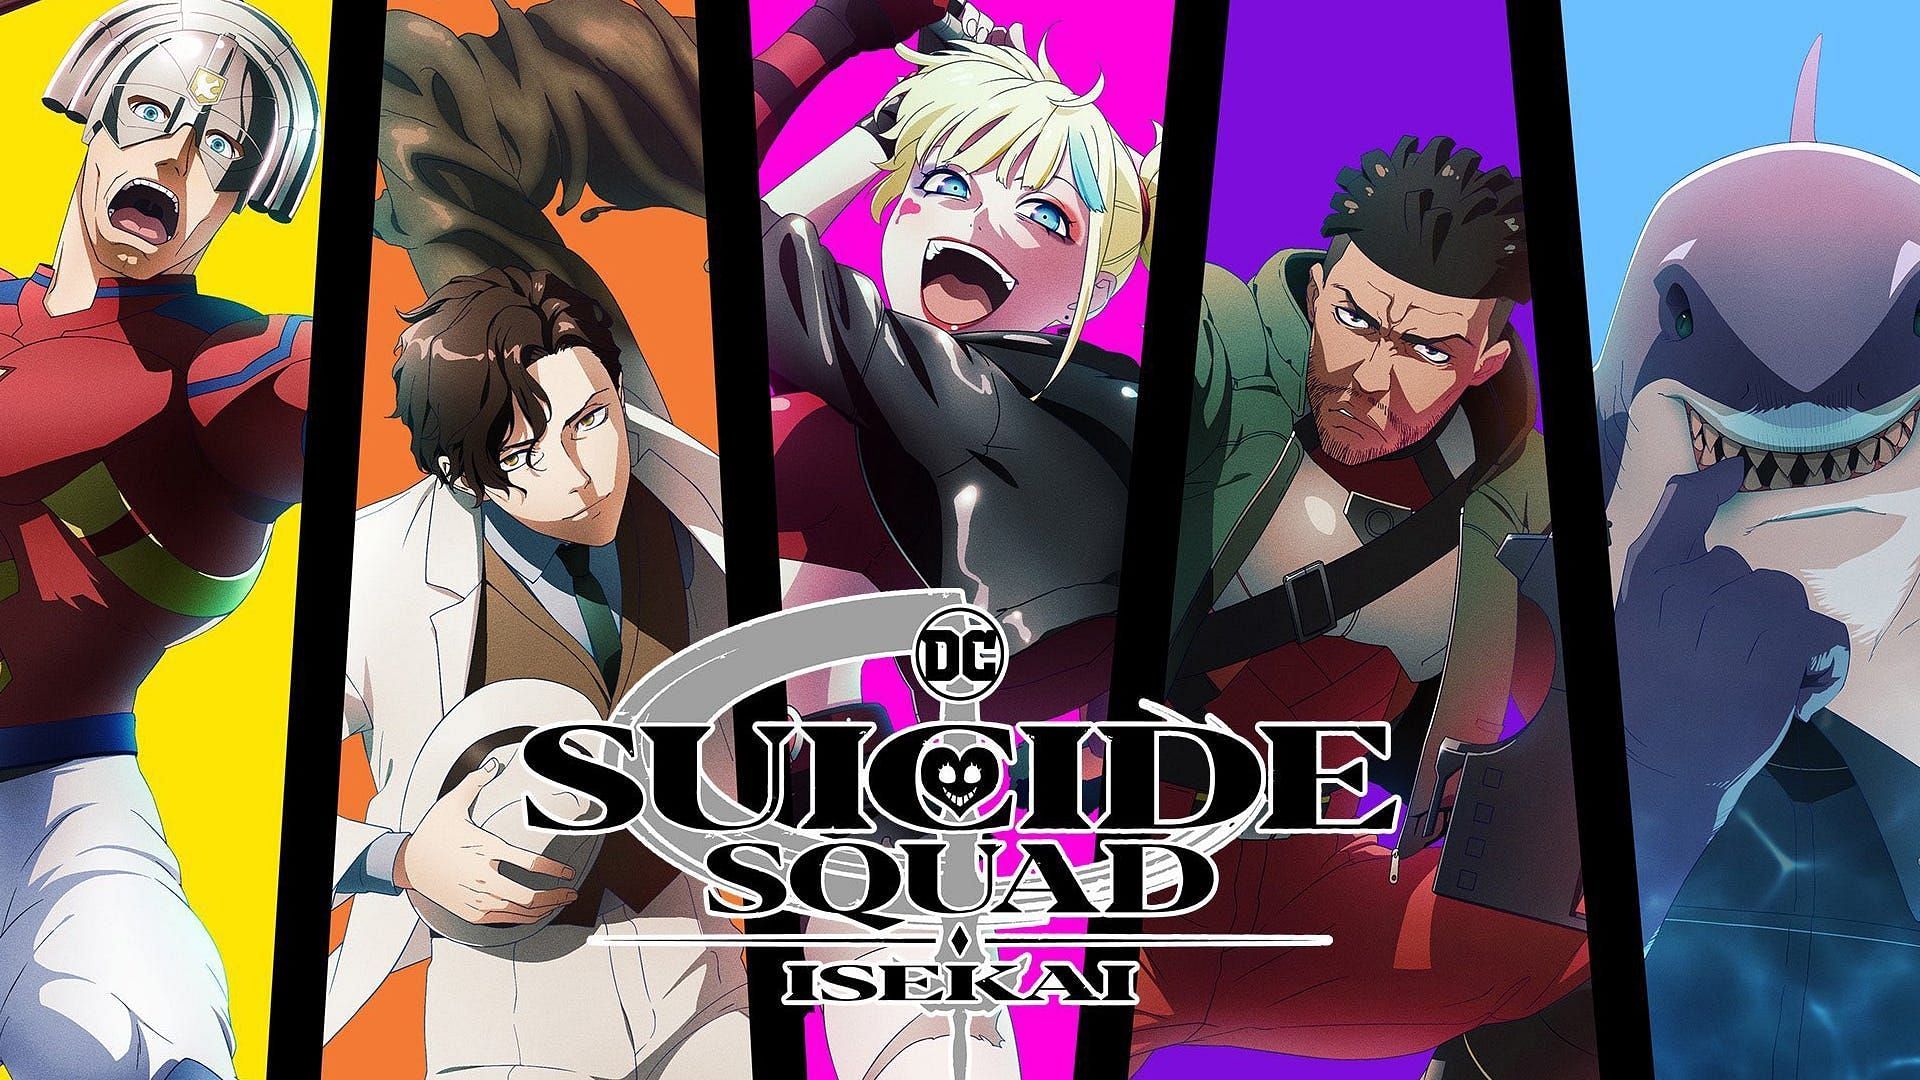 The series&#039; titular group seemingly has some personal enemies in the Empire heading into Suicide Squad Isekai episode 4 (Image via DC, Wit Studios)